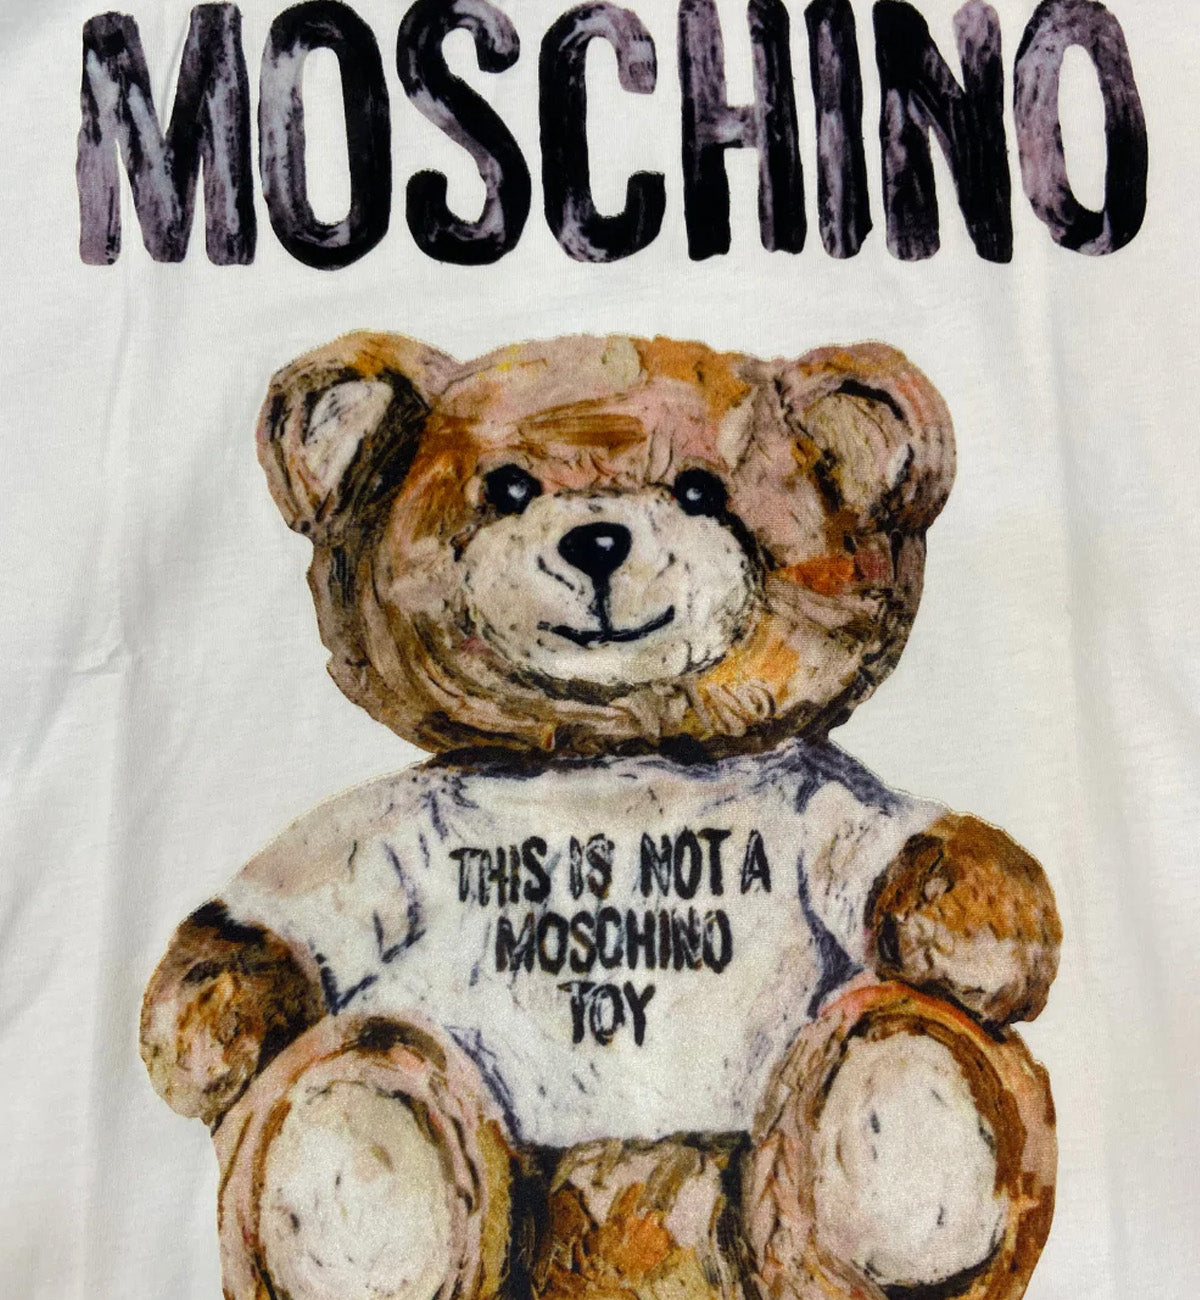 Moschino This Is Not A Moschino Toy Printed T-Shirt (White)